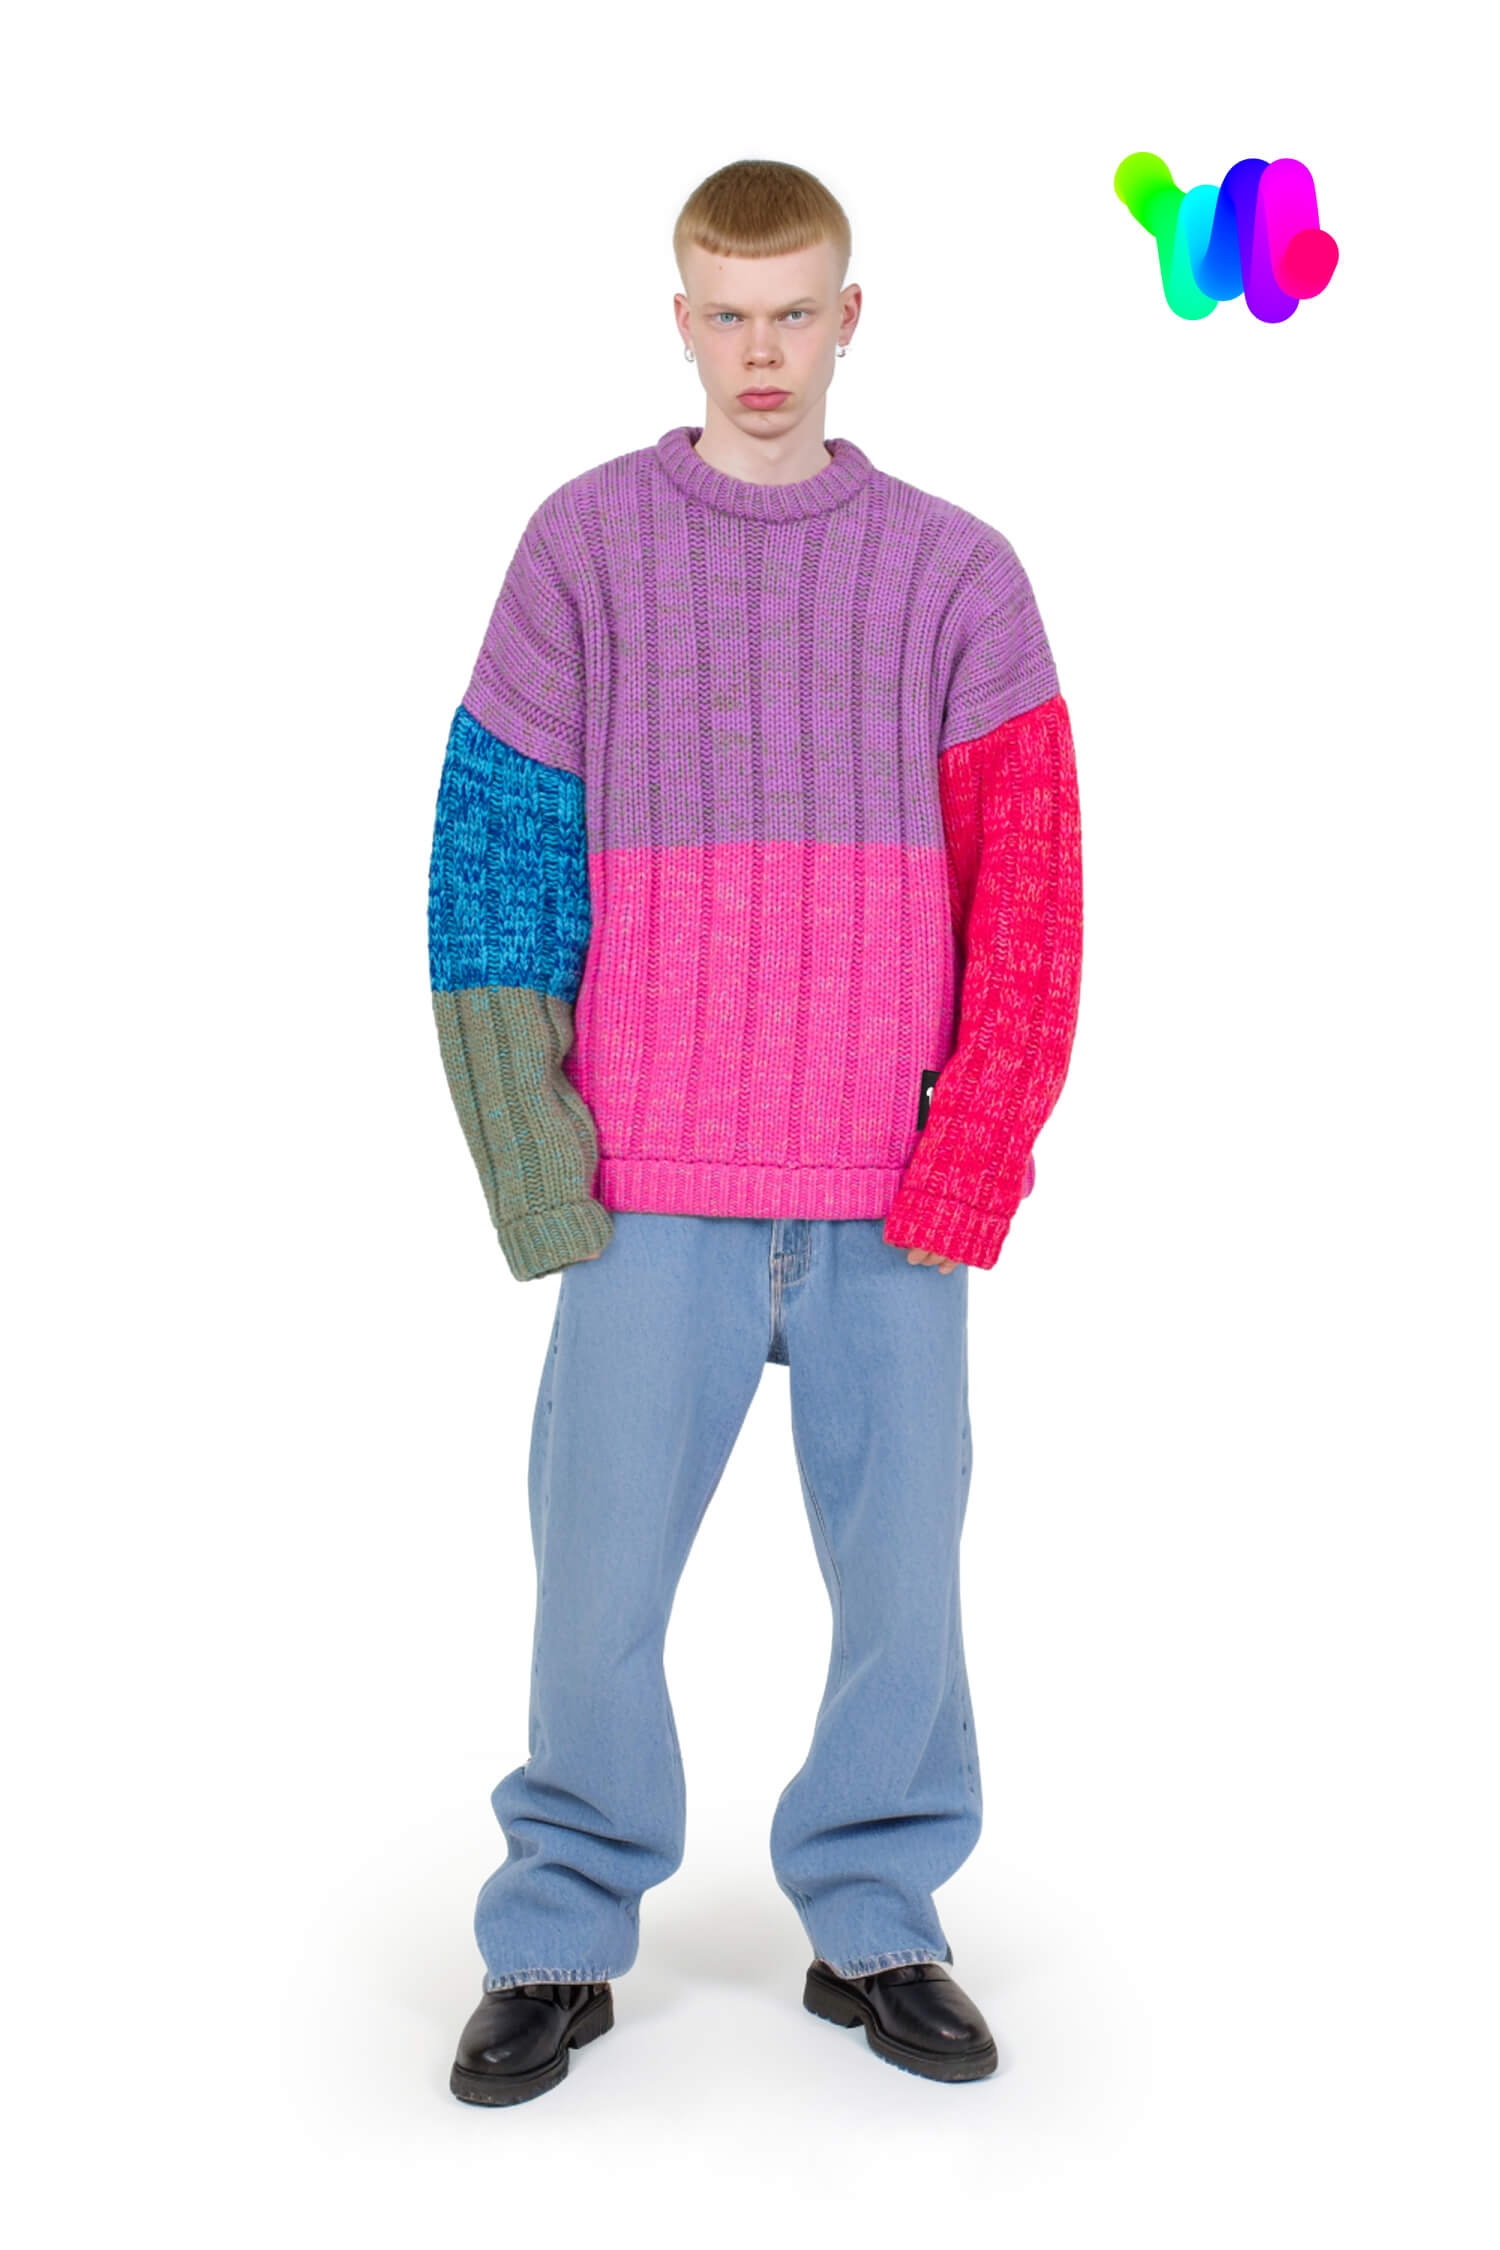 ODDS generative sweater based on Squiggle #9260 Bold on a male model